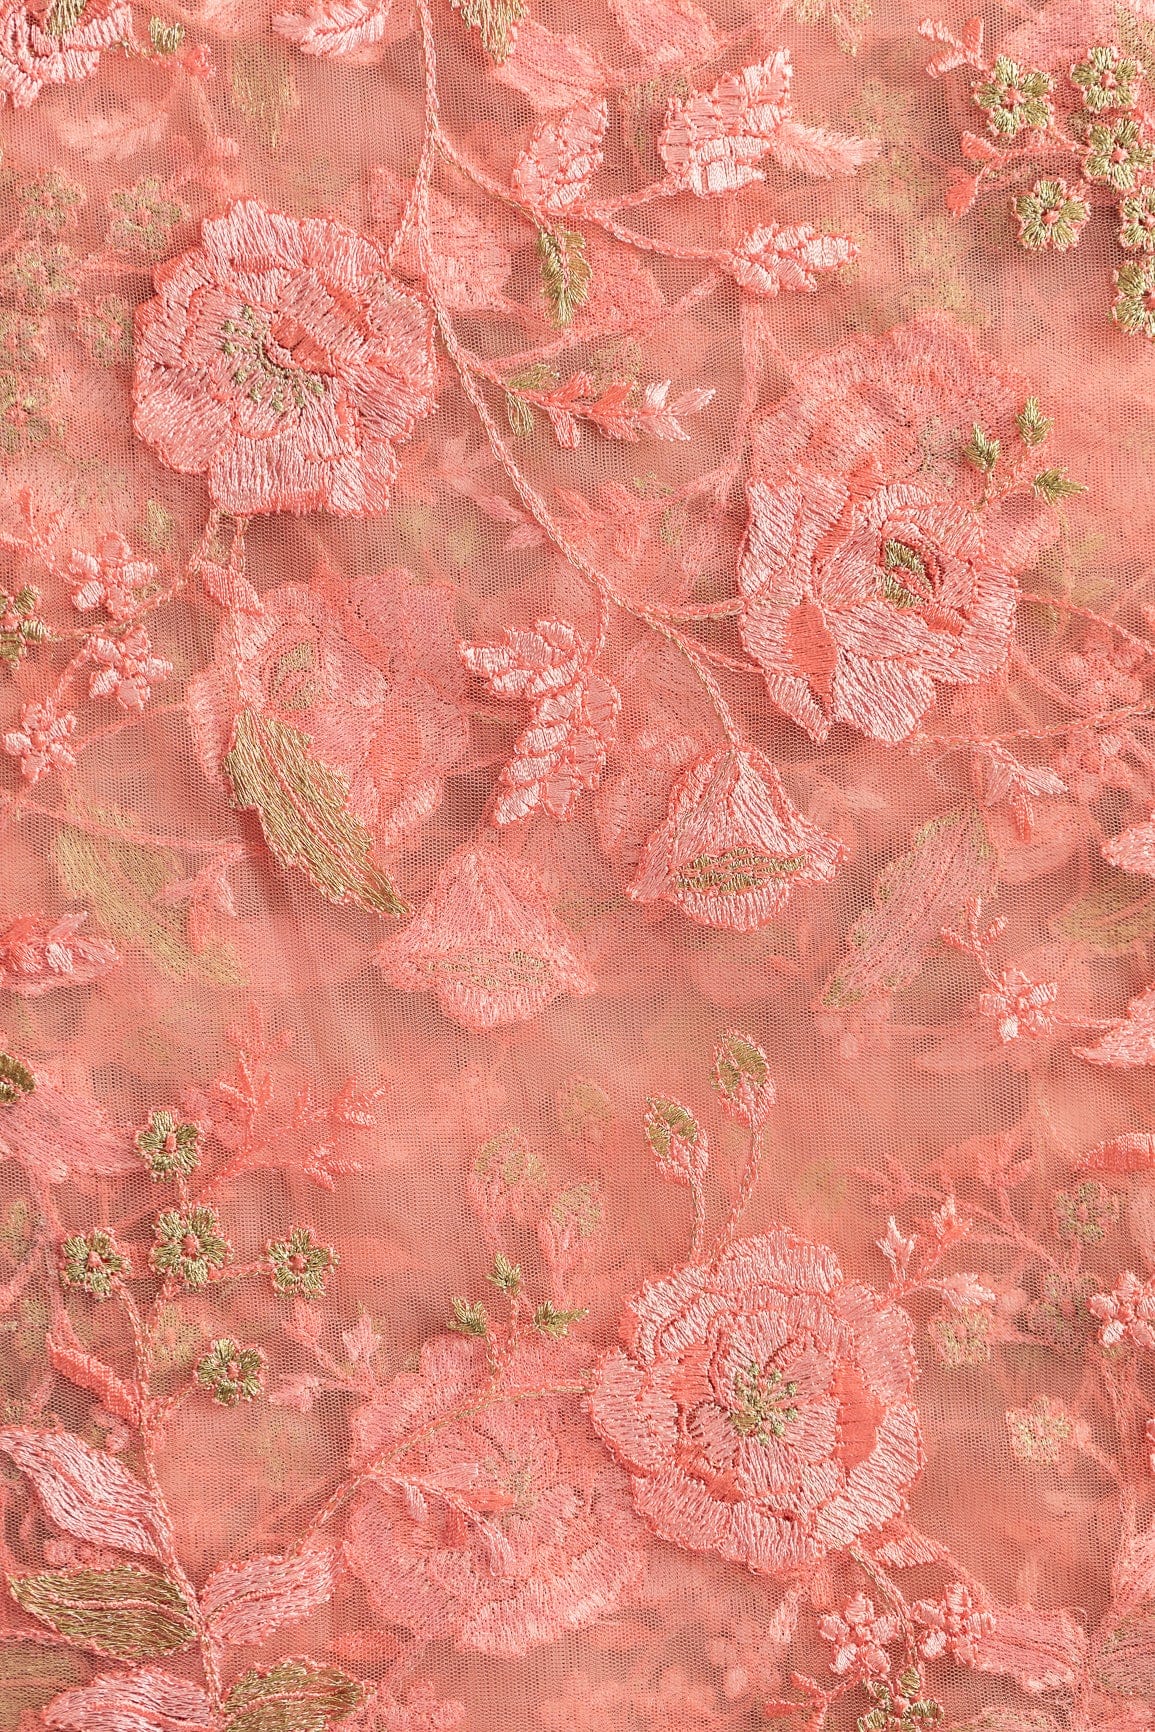 doeraa Embroidery Fabrics Heavy Floral Thread Work  Embroidery On Baby Pink Soft Net Fabric